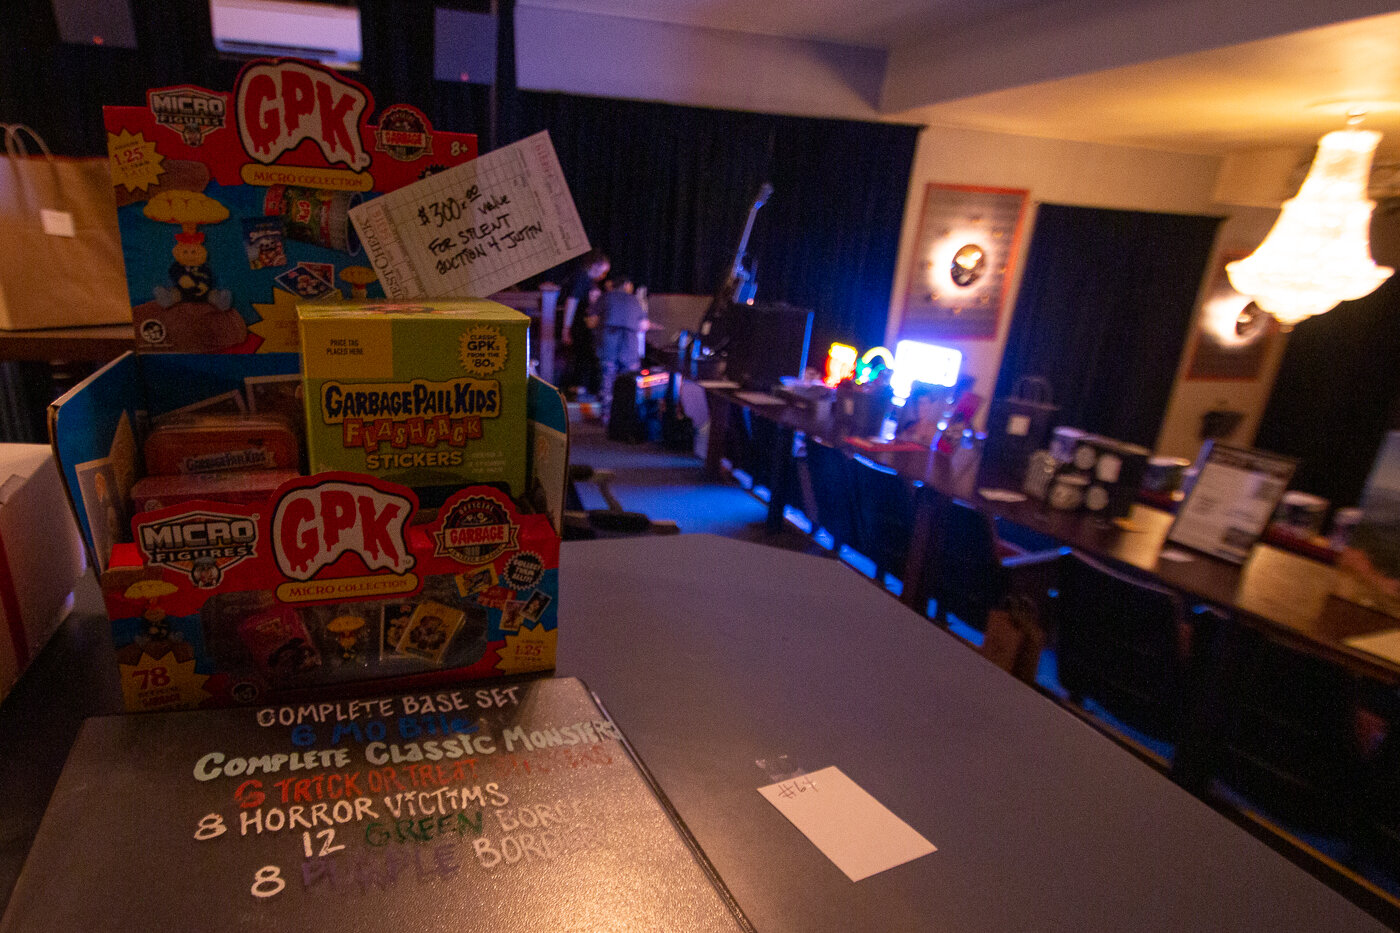 Garbage Pale Kids collectables were among the many items up for bid at Saturday night's silent auction held in benefit for Justin Ames' daughters Saturday night at McFiler's Chehalis Theater.